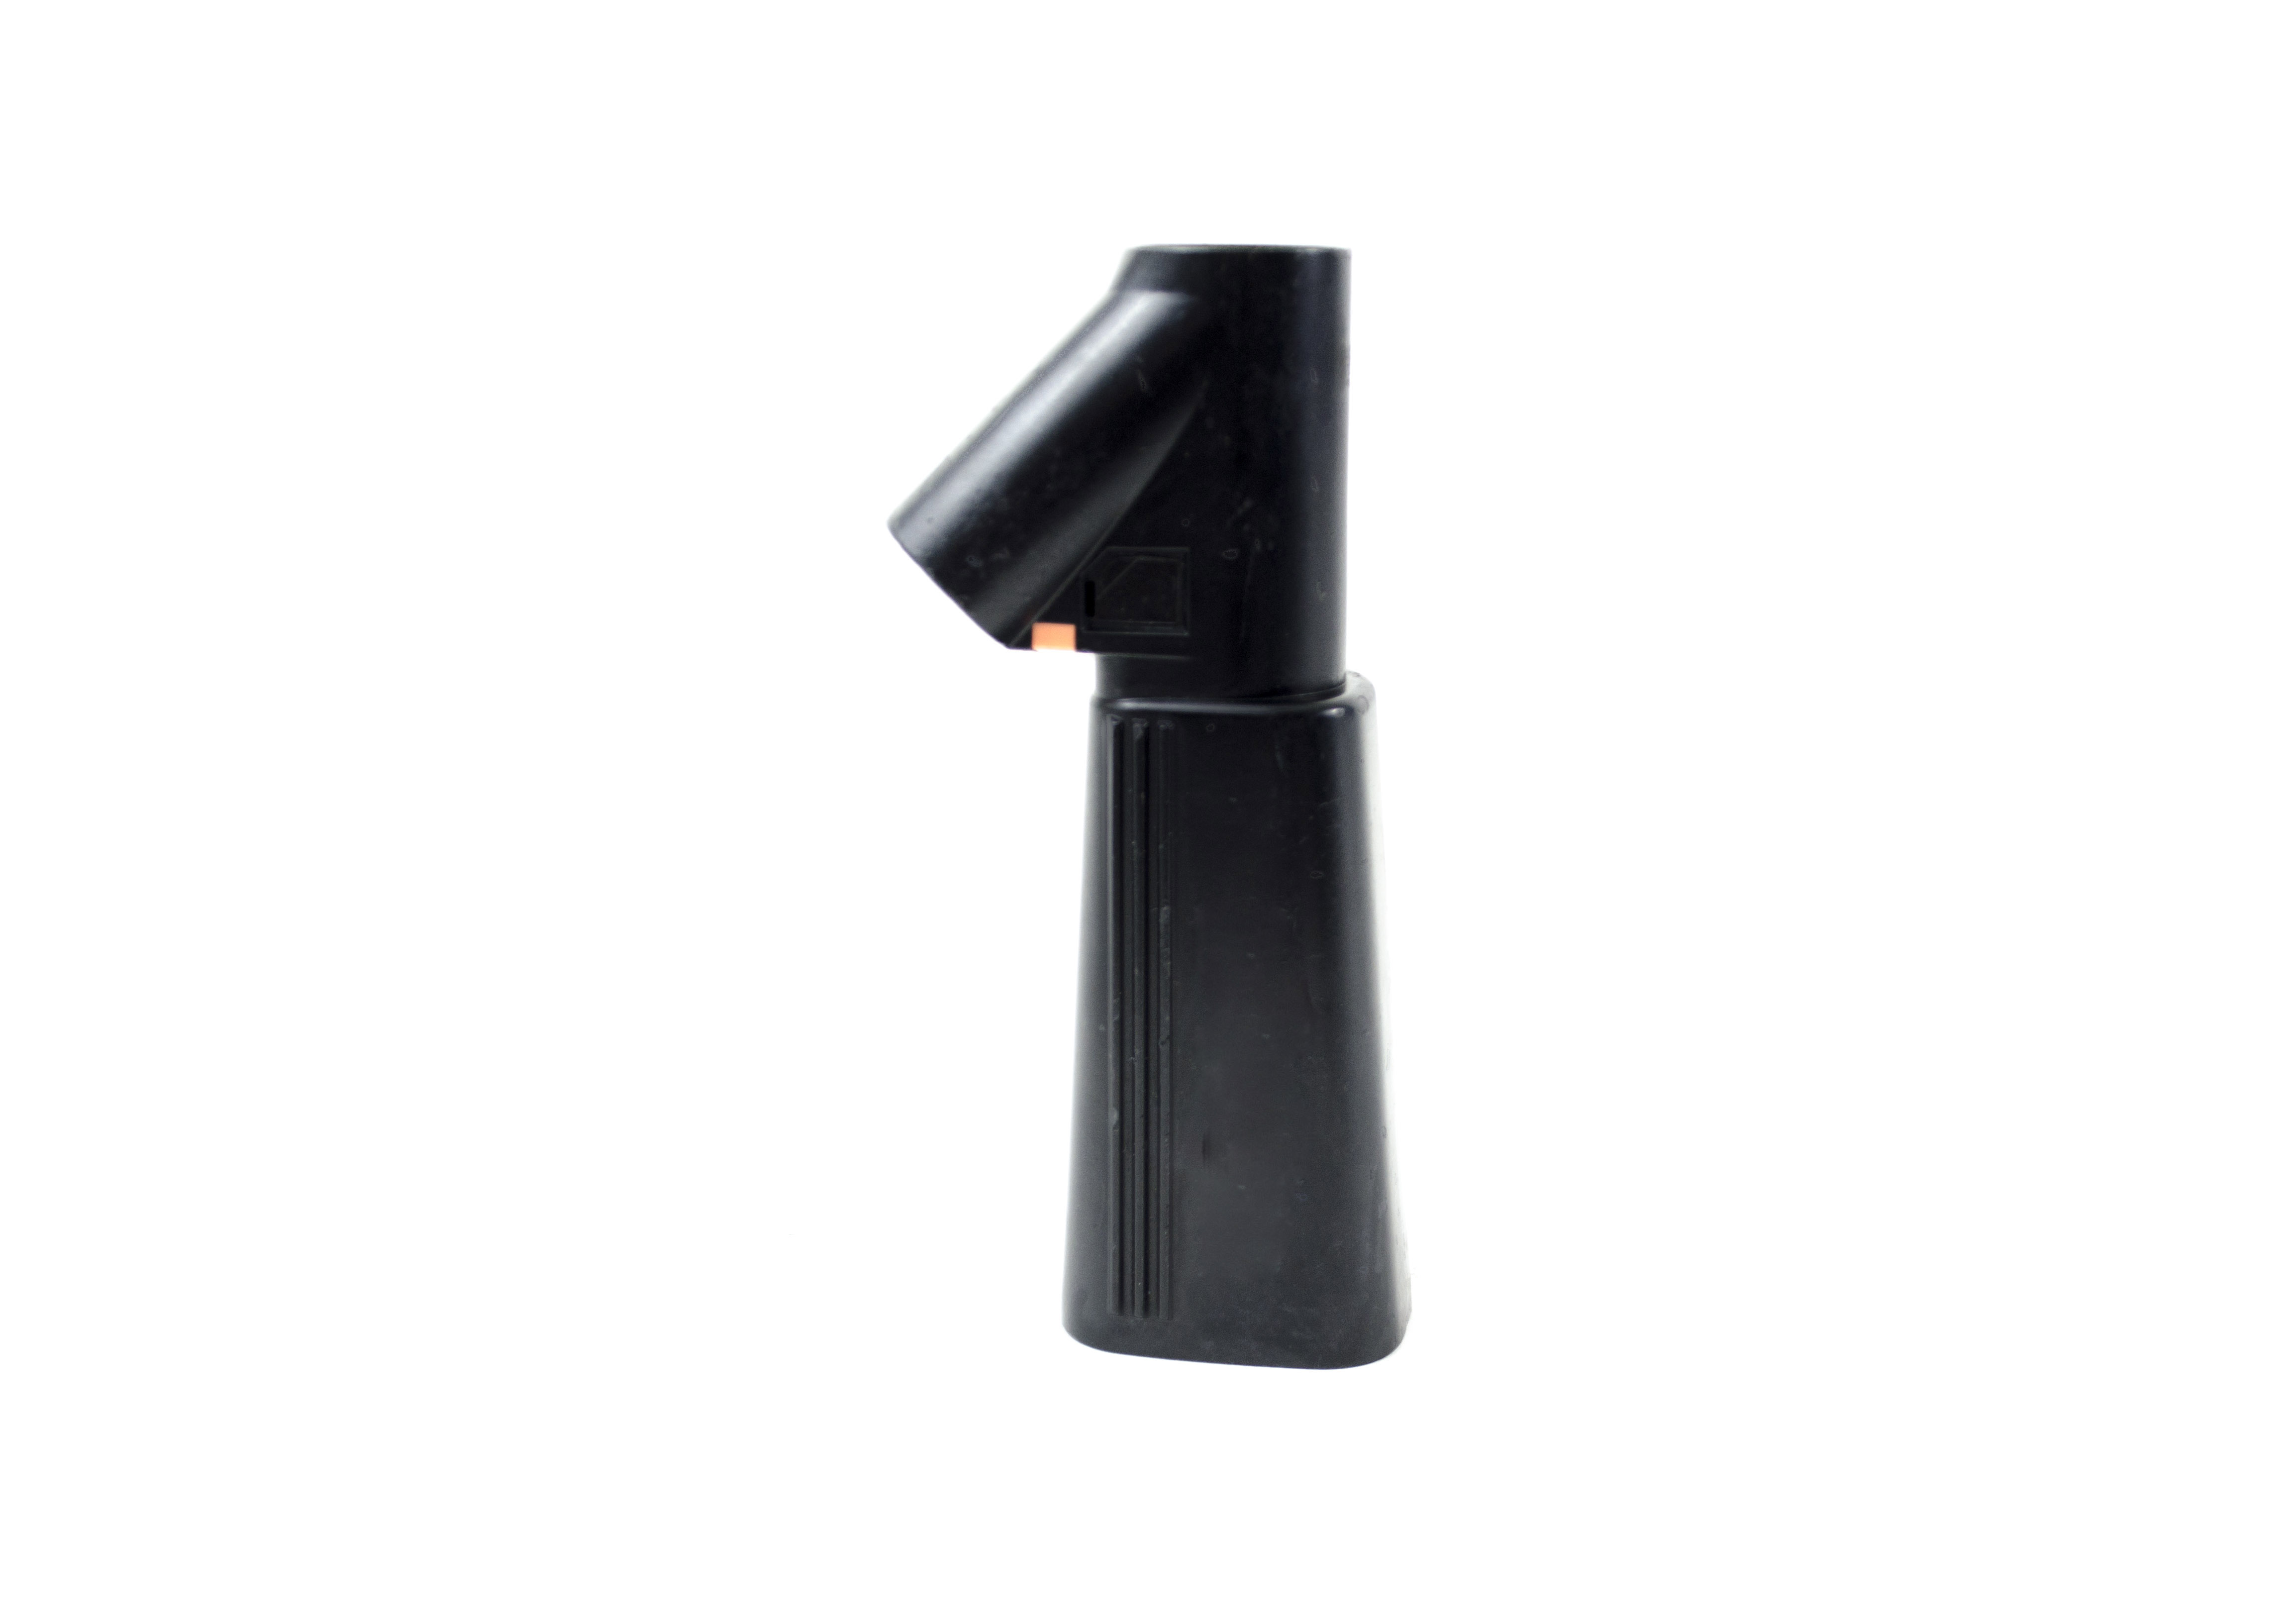 OEM Control Grip (Without Nameplate) - GIF-2T160, GIF-2T100